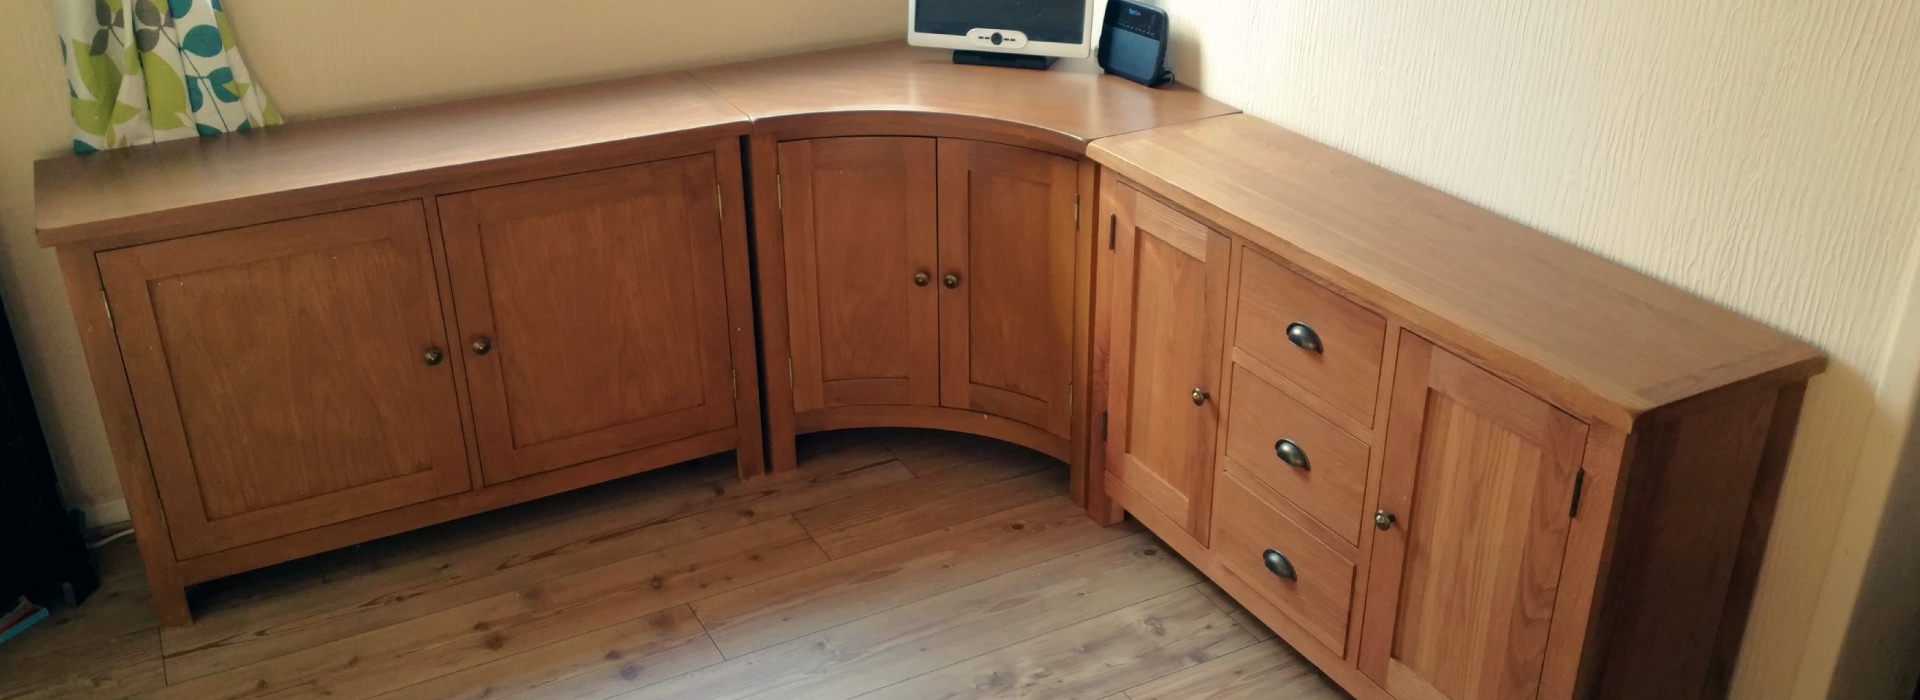 Bespoke joinery Services for Basingstoke, Reading and the Thames Valley by New Vision Joinery